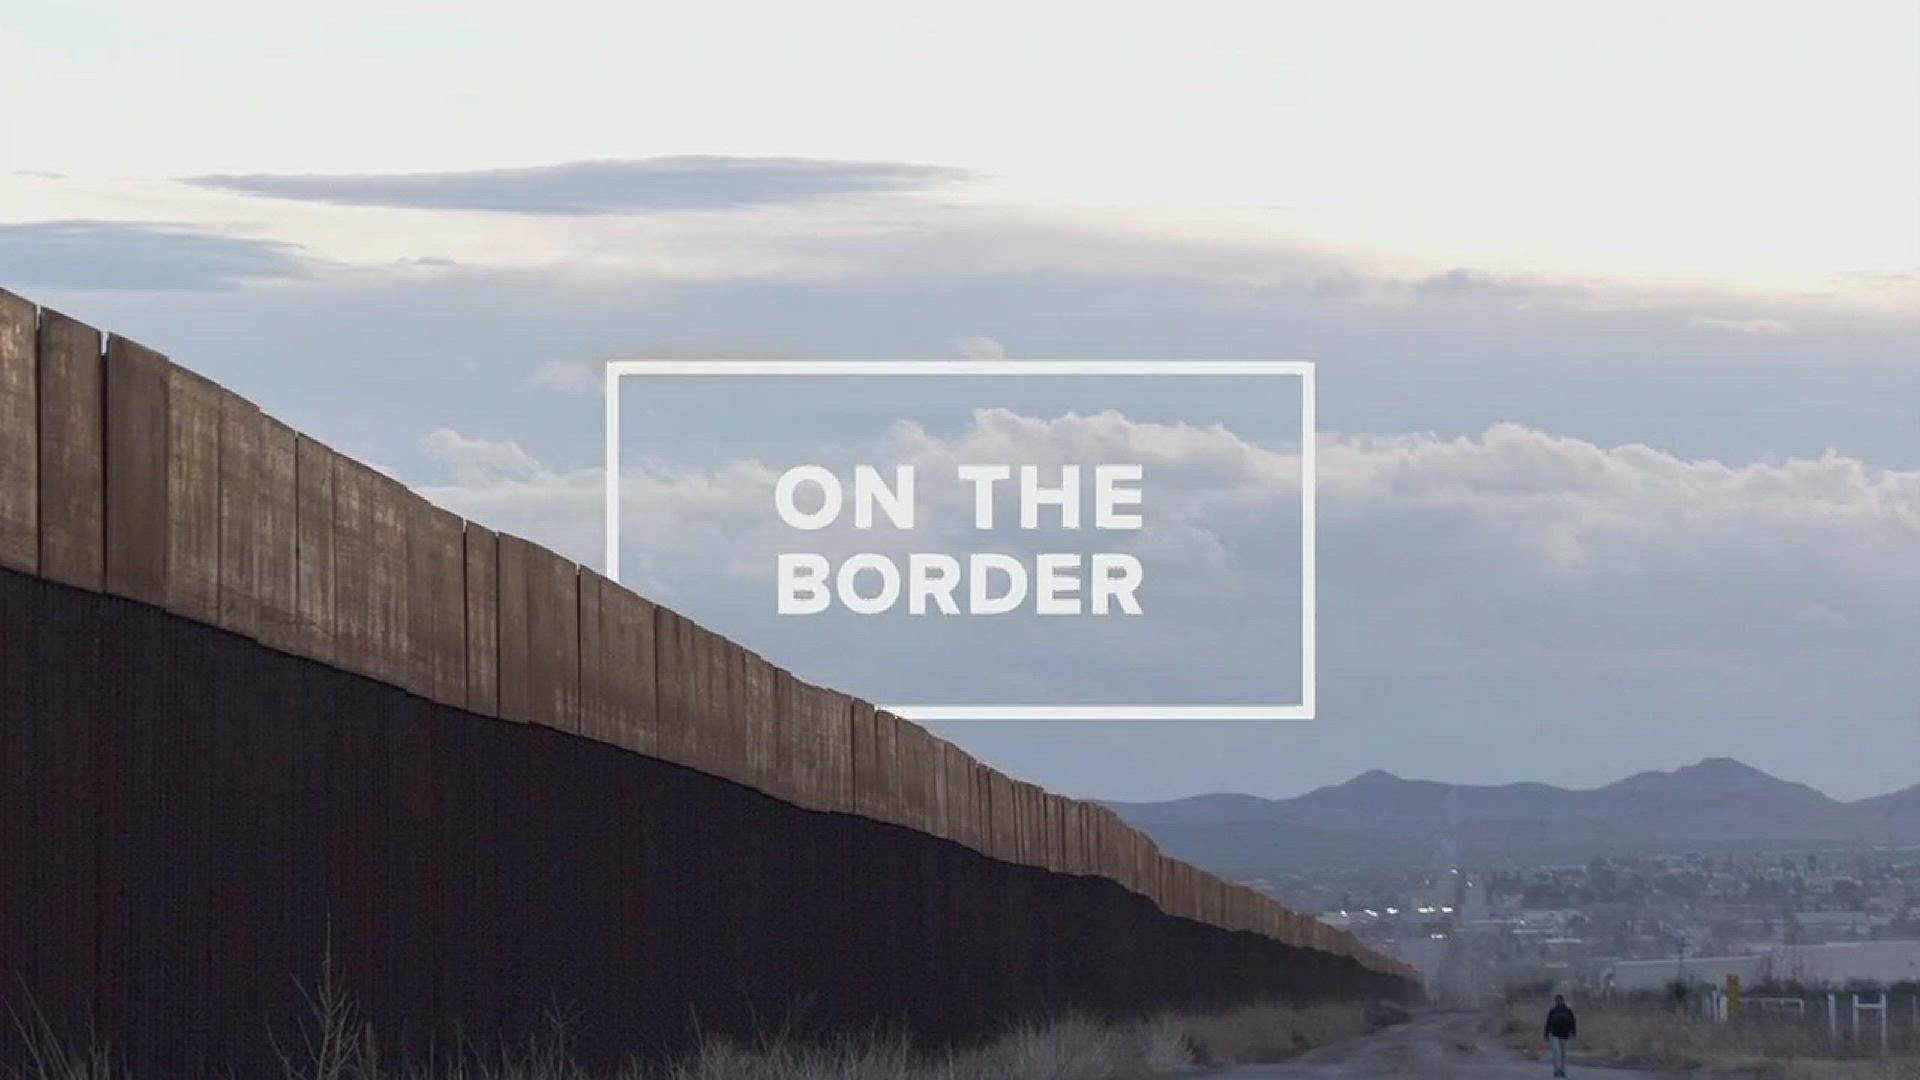 Border Patrol agents are chasing smugglers around the clock. Last year, they captured 300,000 undocumented immigrants along the southwest border alone. KENS 5's Sarah Forgany spent a weekend with agents on the border as they came face to face with smuggle